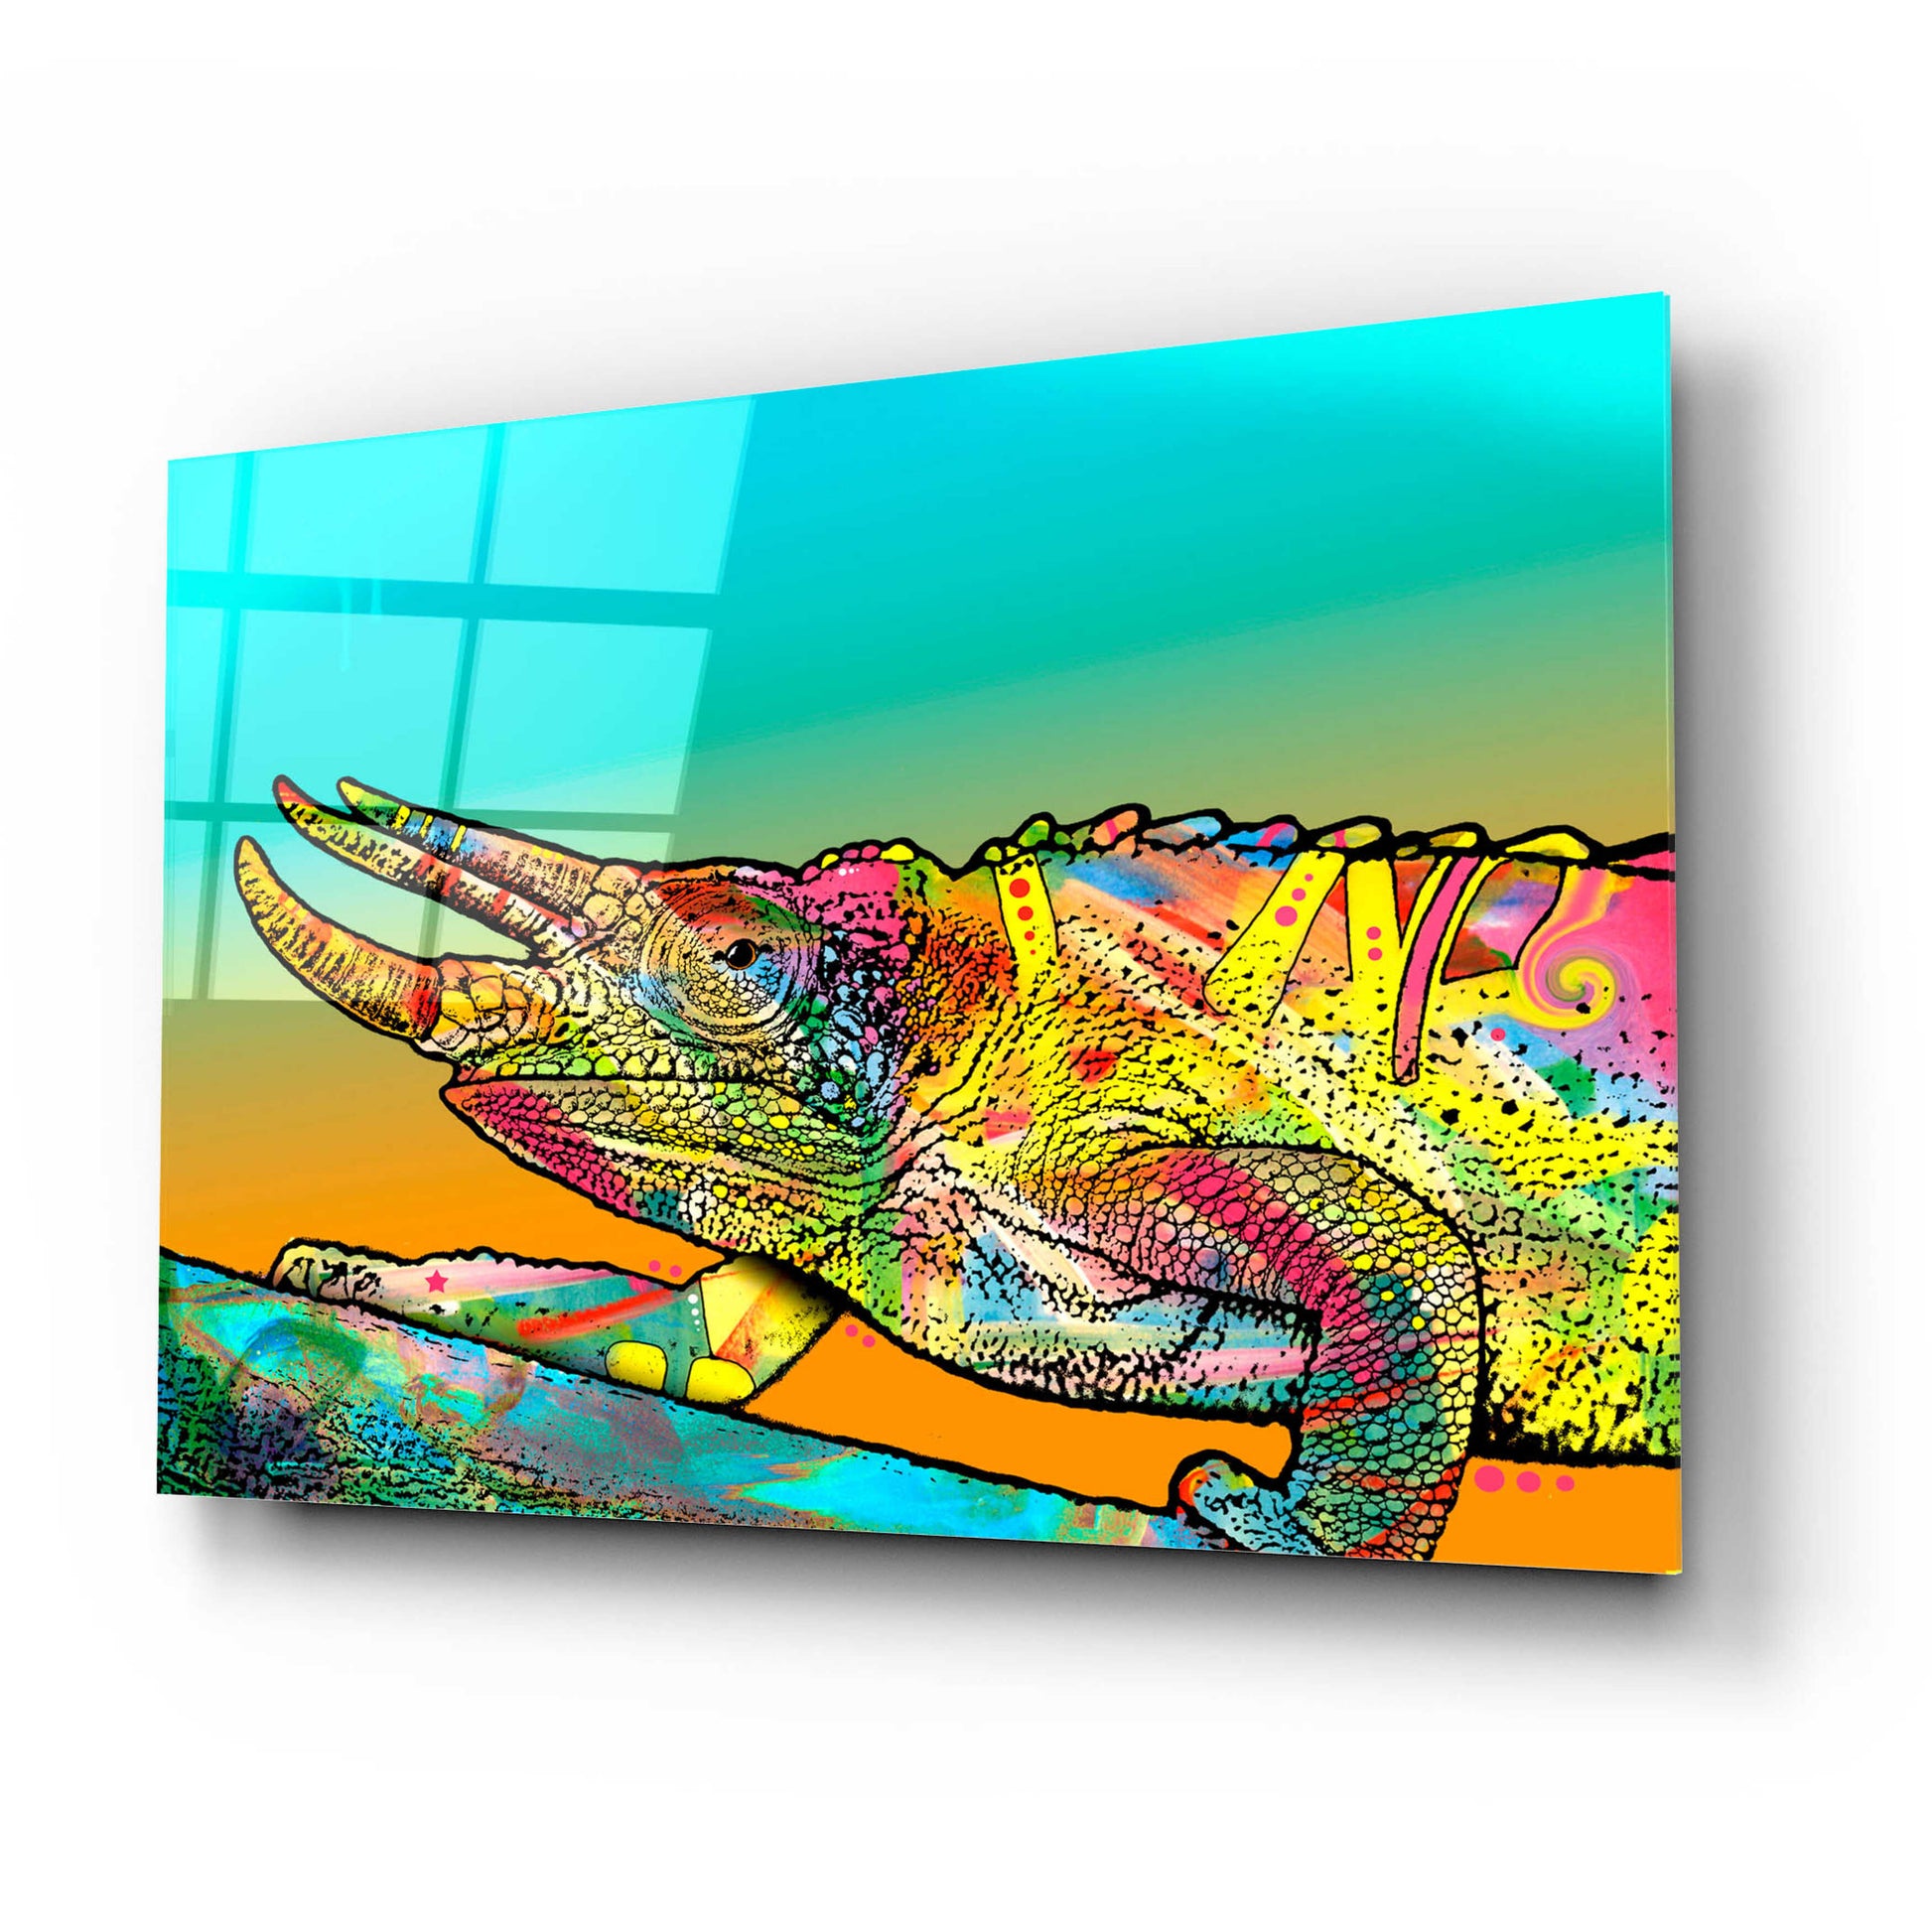 Epic Art 'Chameleon' by Dean Russo, Acrylic Glass Wall Art,24x16